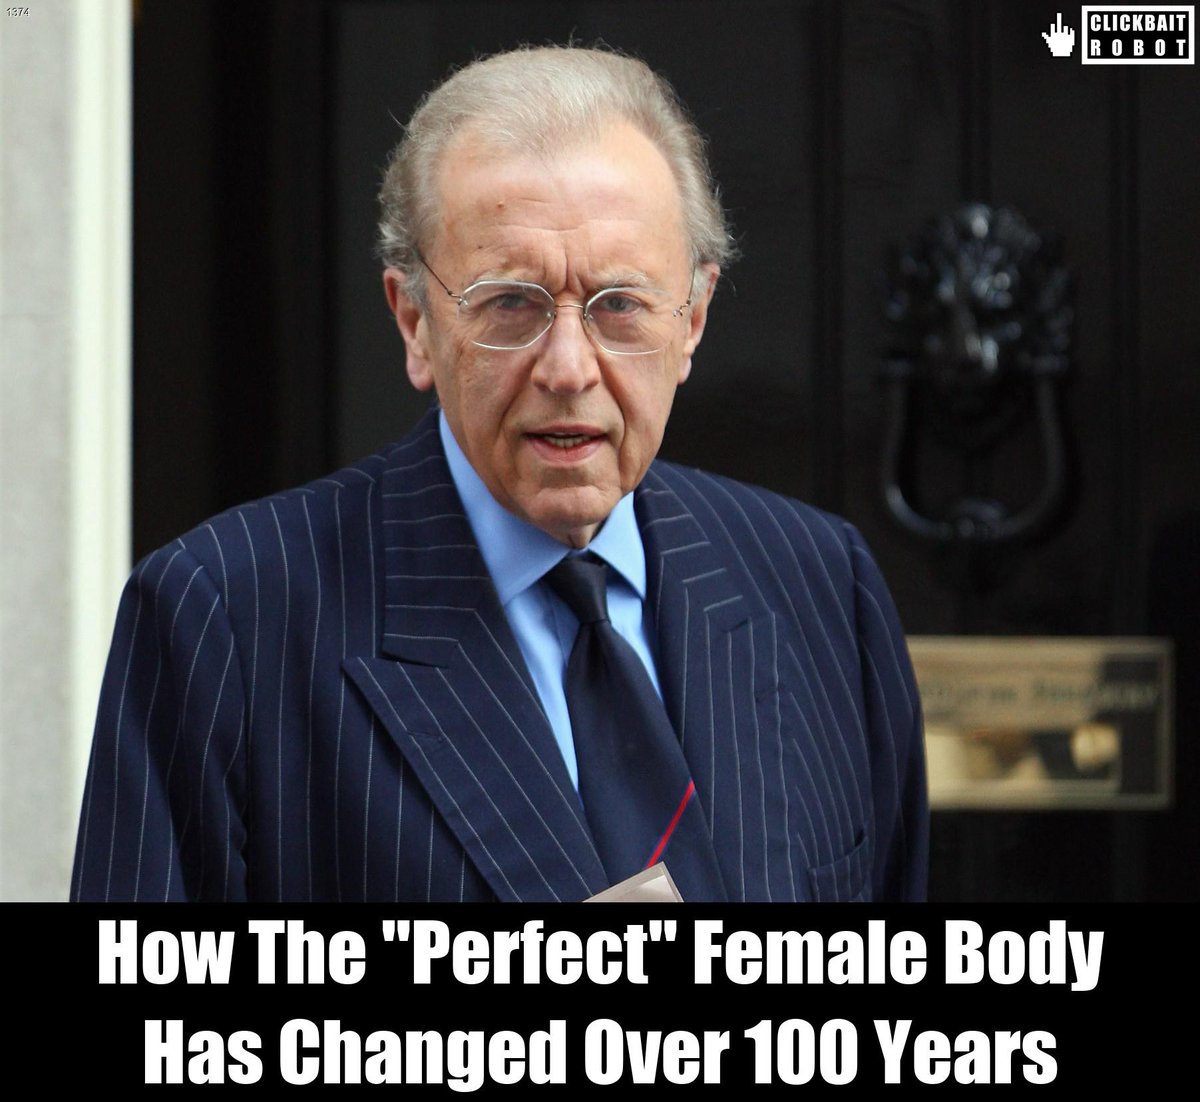 How The 'Perfect' Female Body Has Changed Over 100 Years #DavidFrost